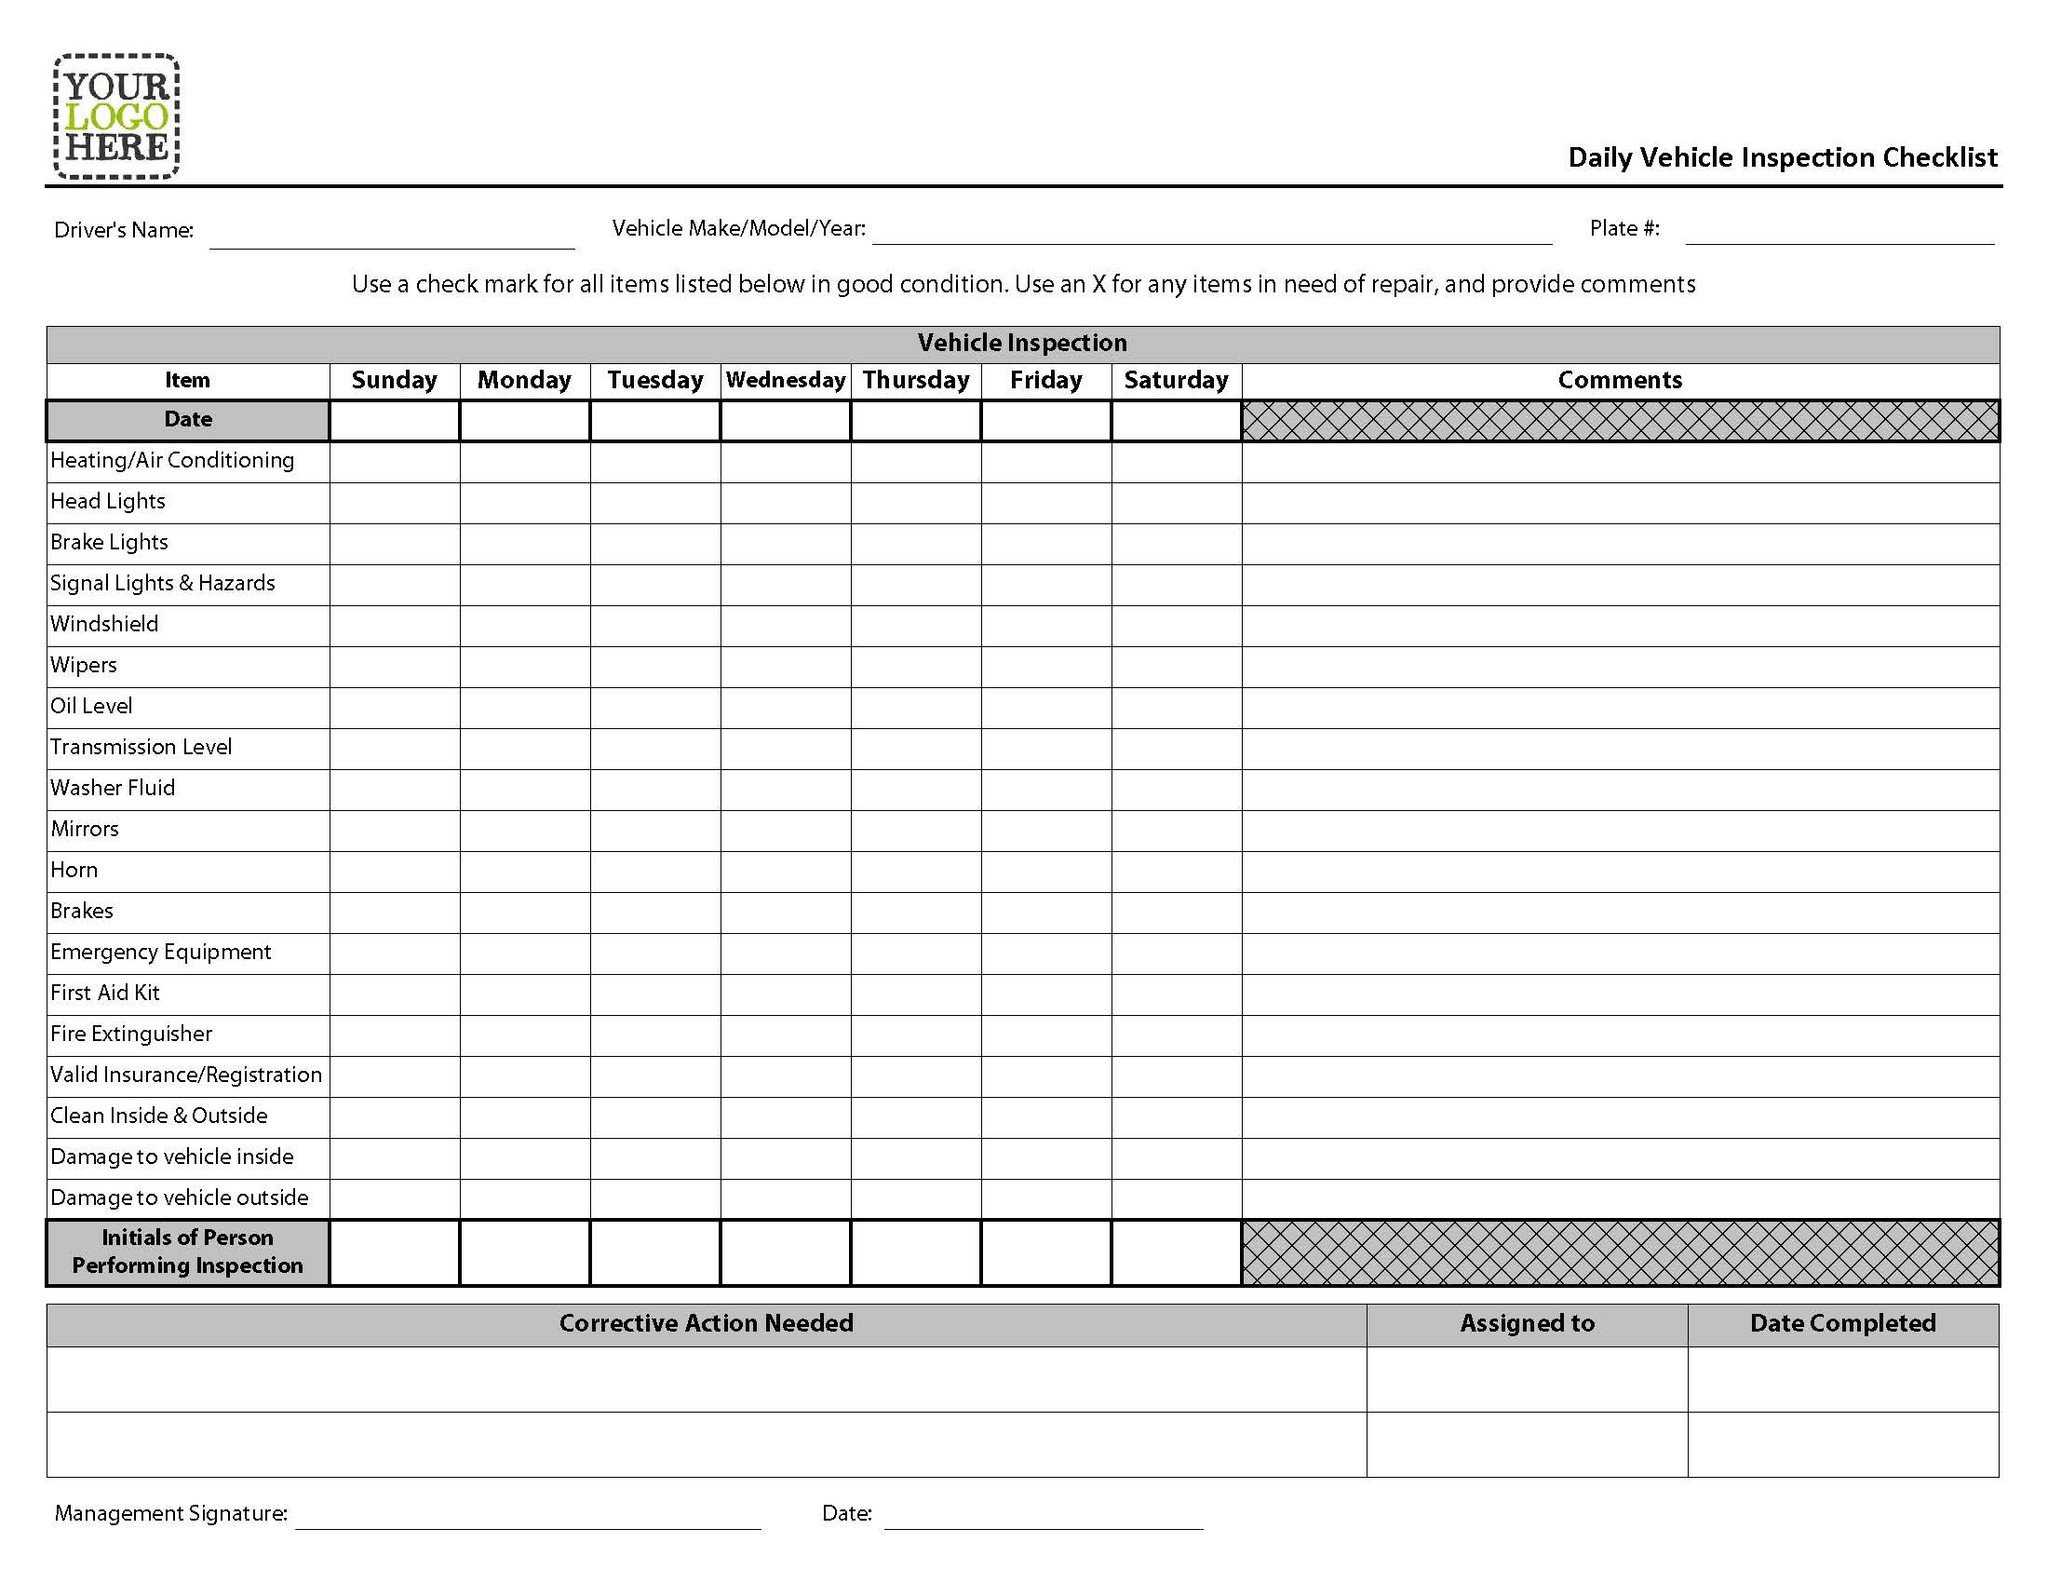 Vehicle Inspection Report Template Download ] – Vehicle In Daily Inspection Report Template